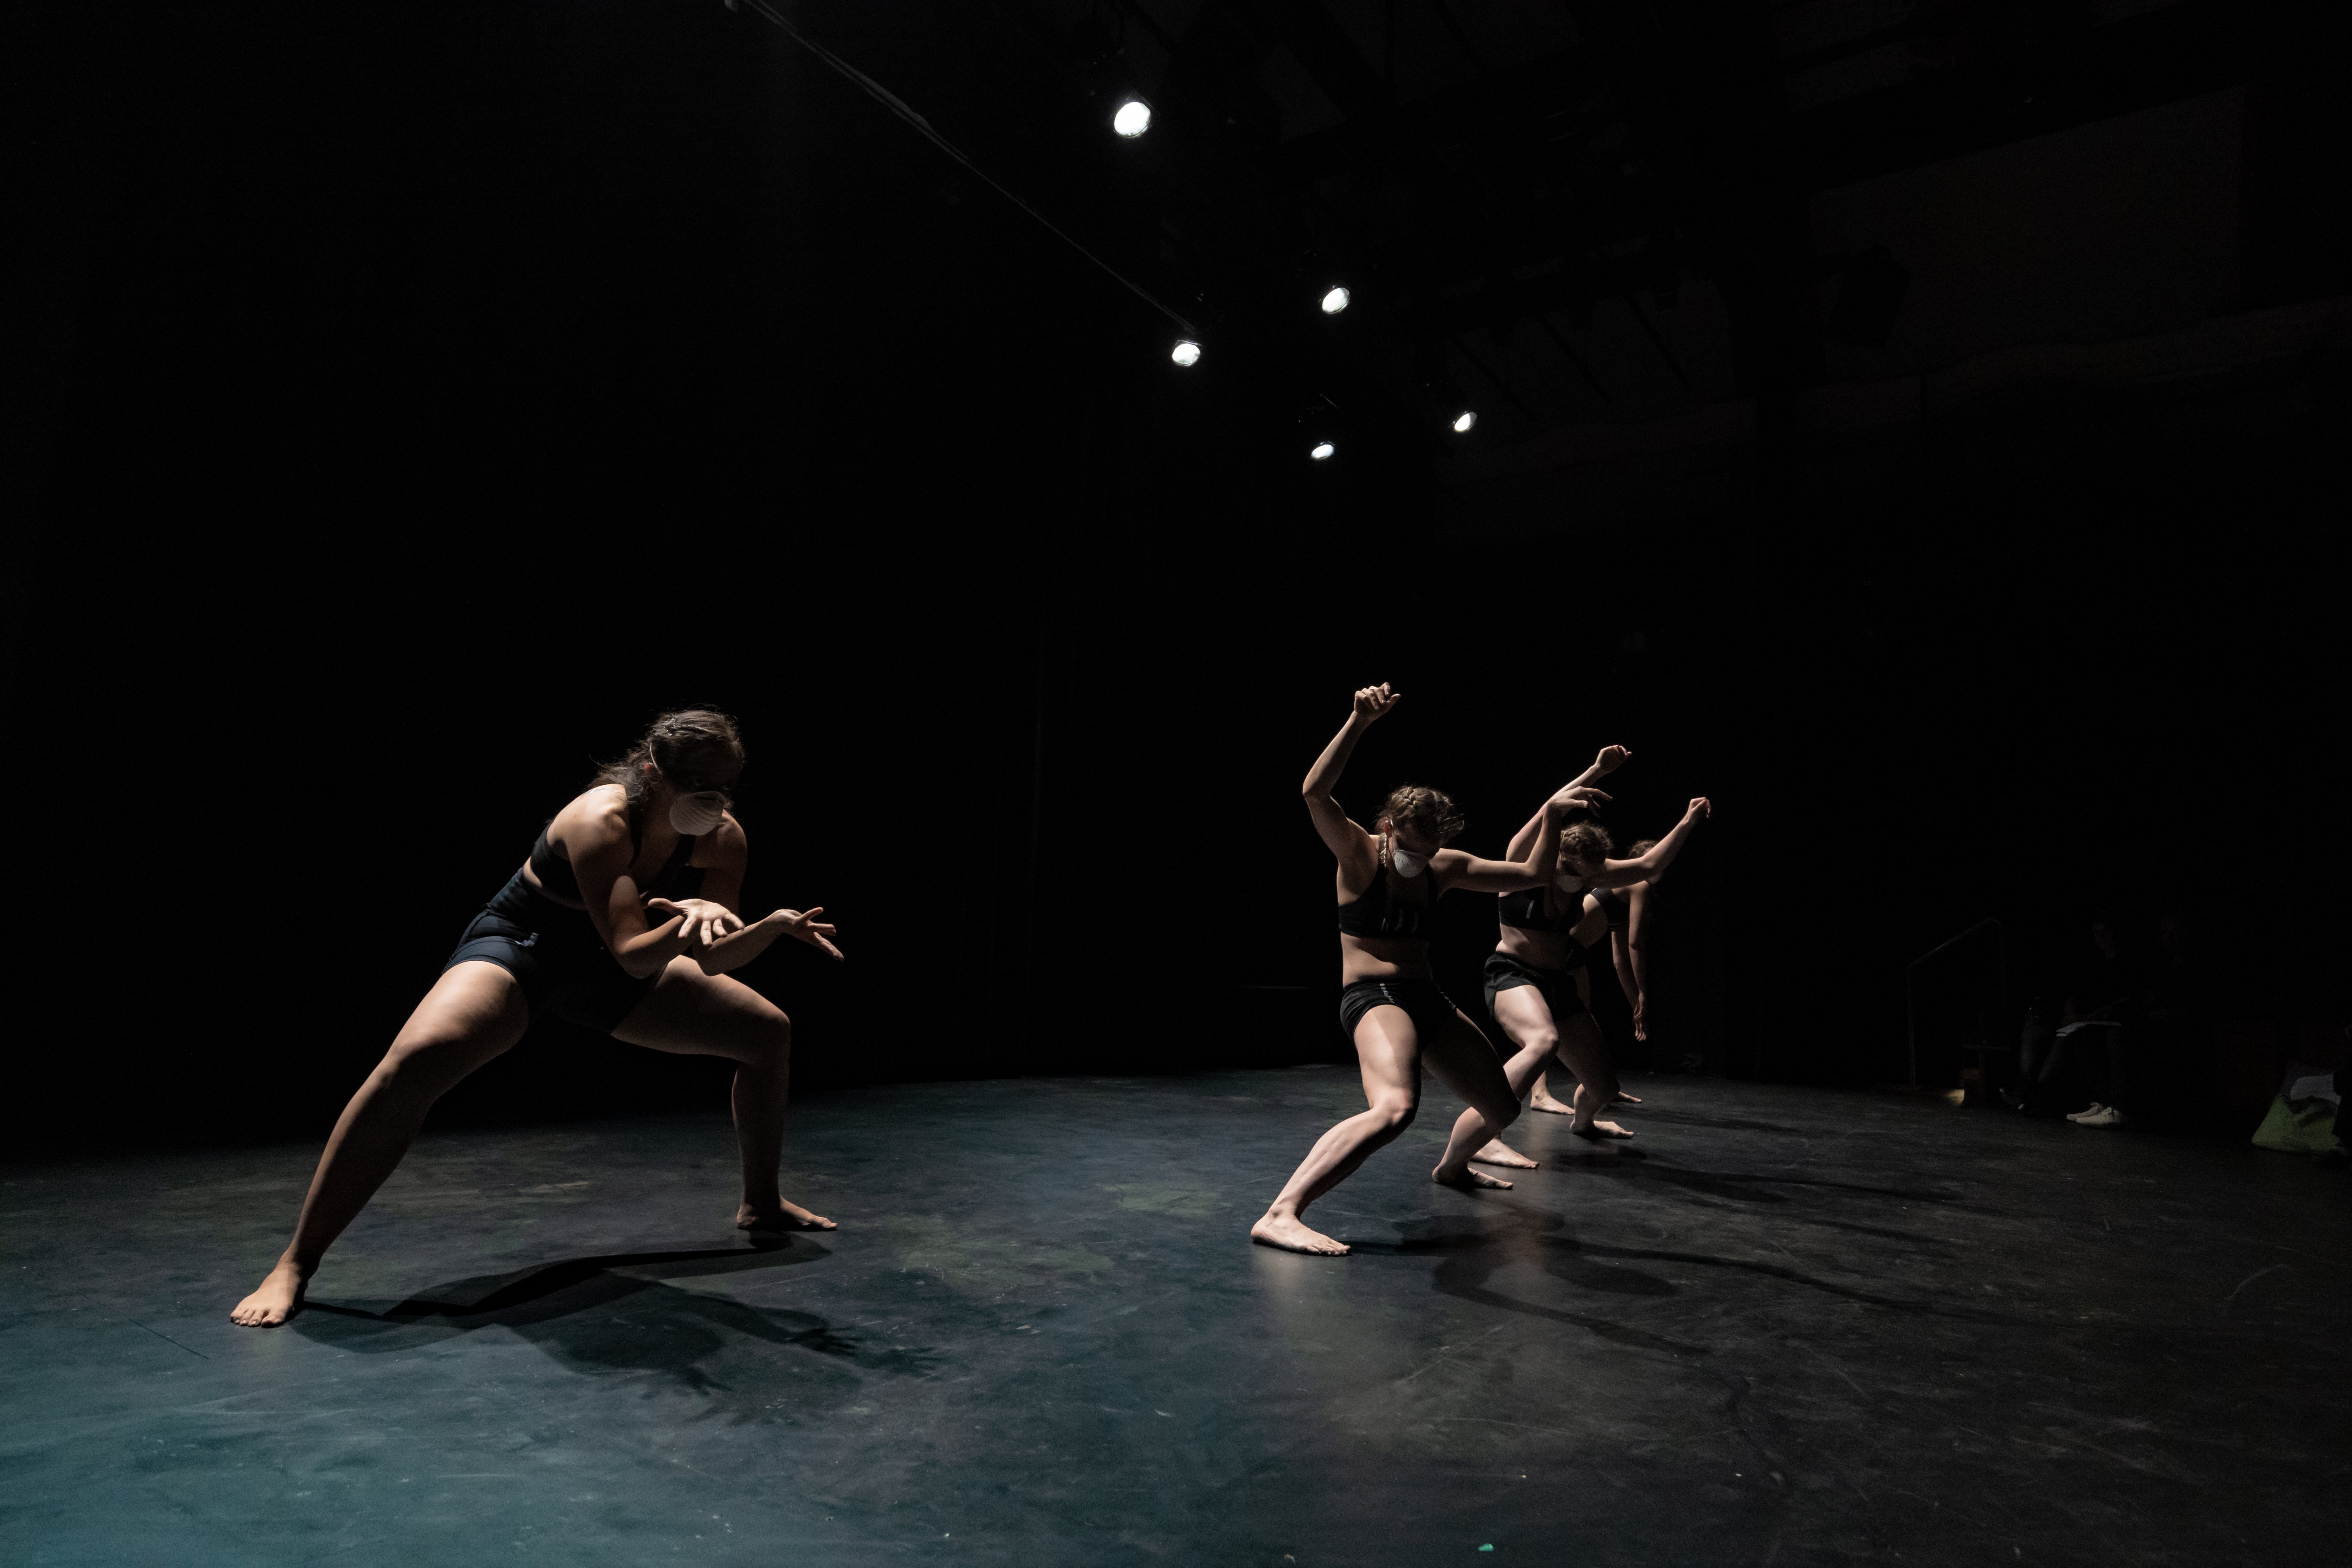 Four performers dancing on stage for Insect Decay performance